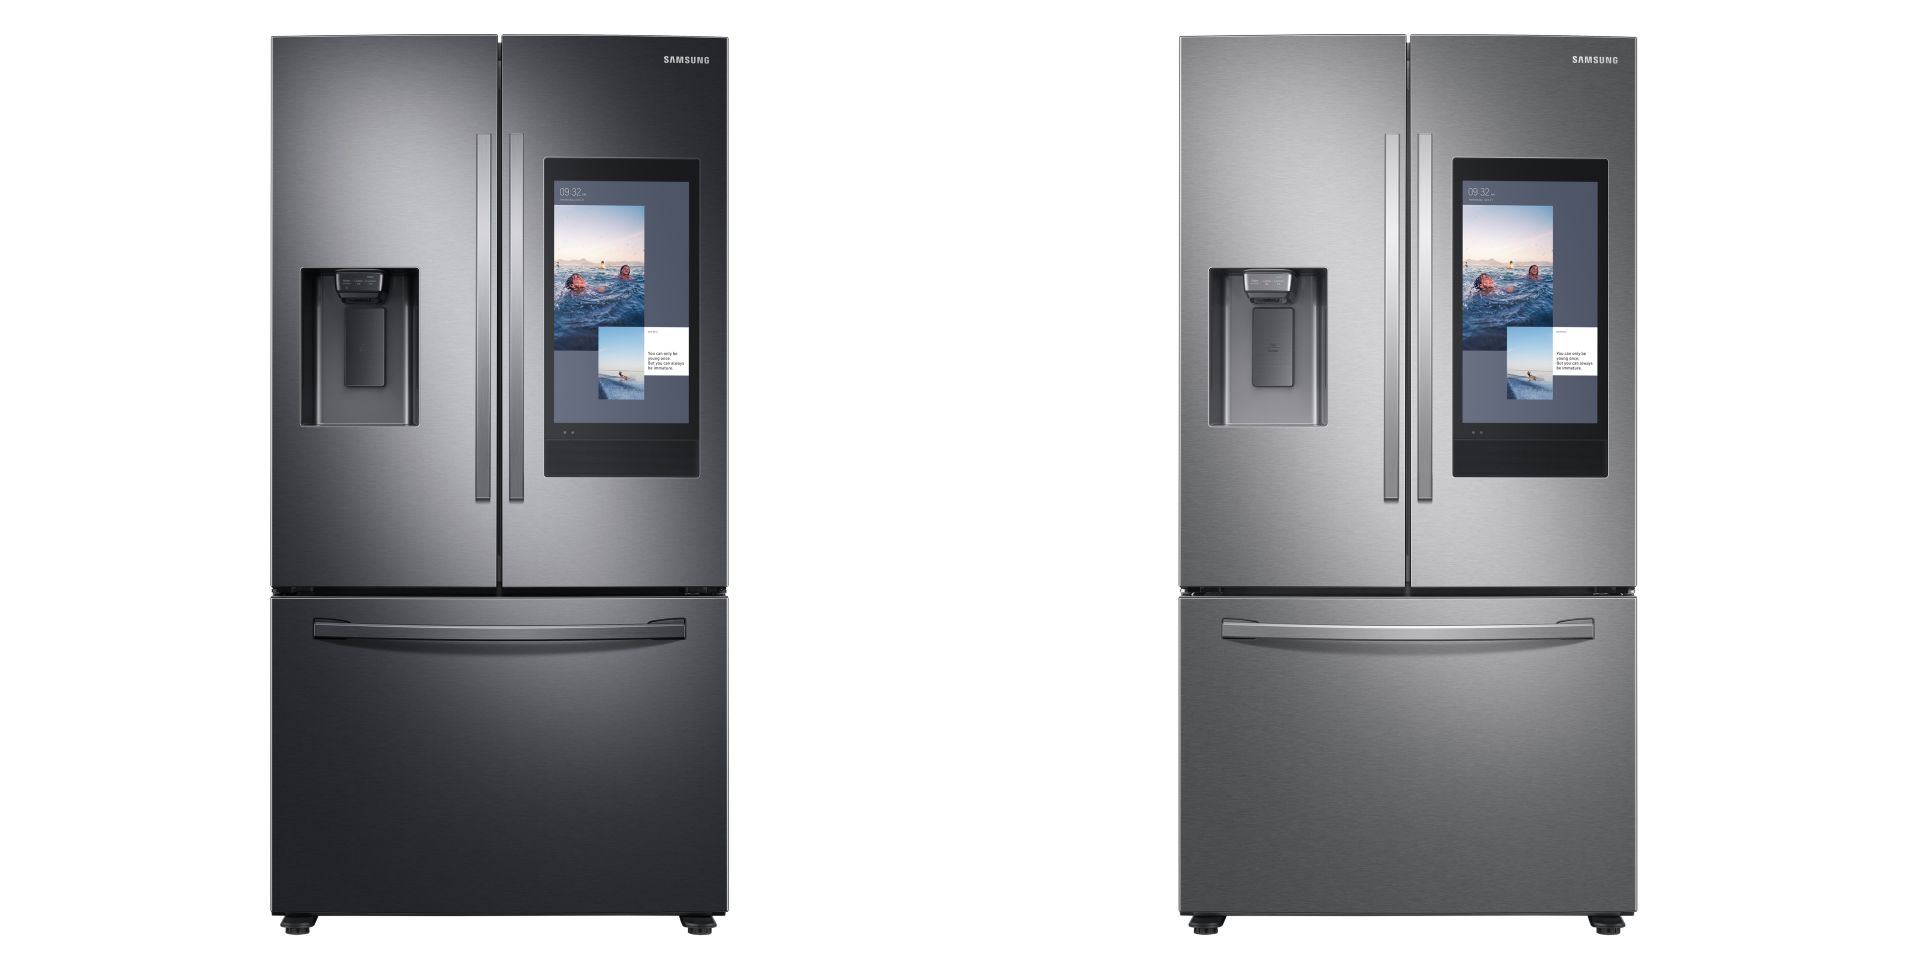 Samsung S 2020 Family Hub Fridges Are On A Whole Other Level